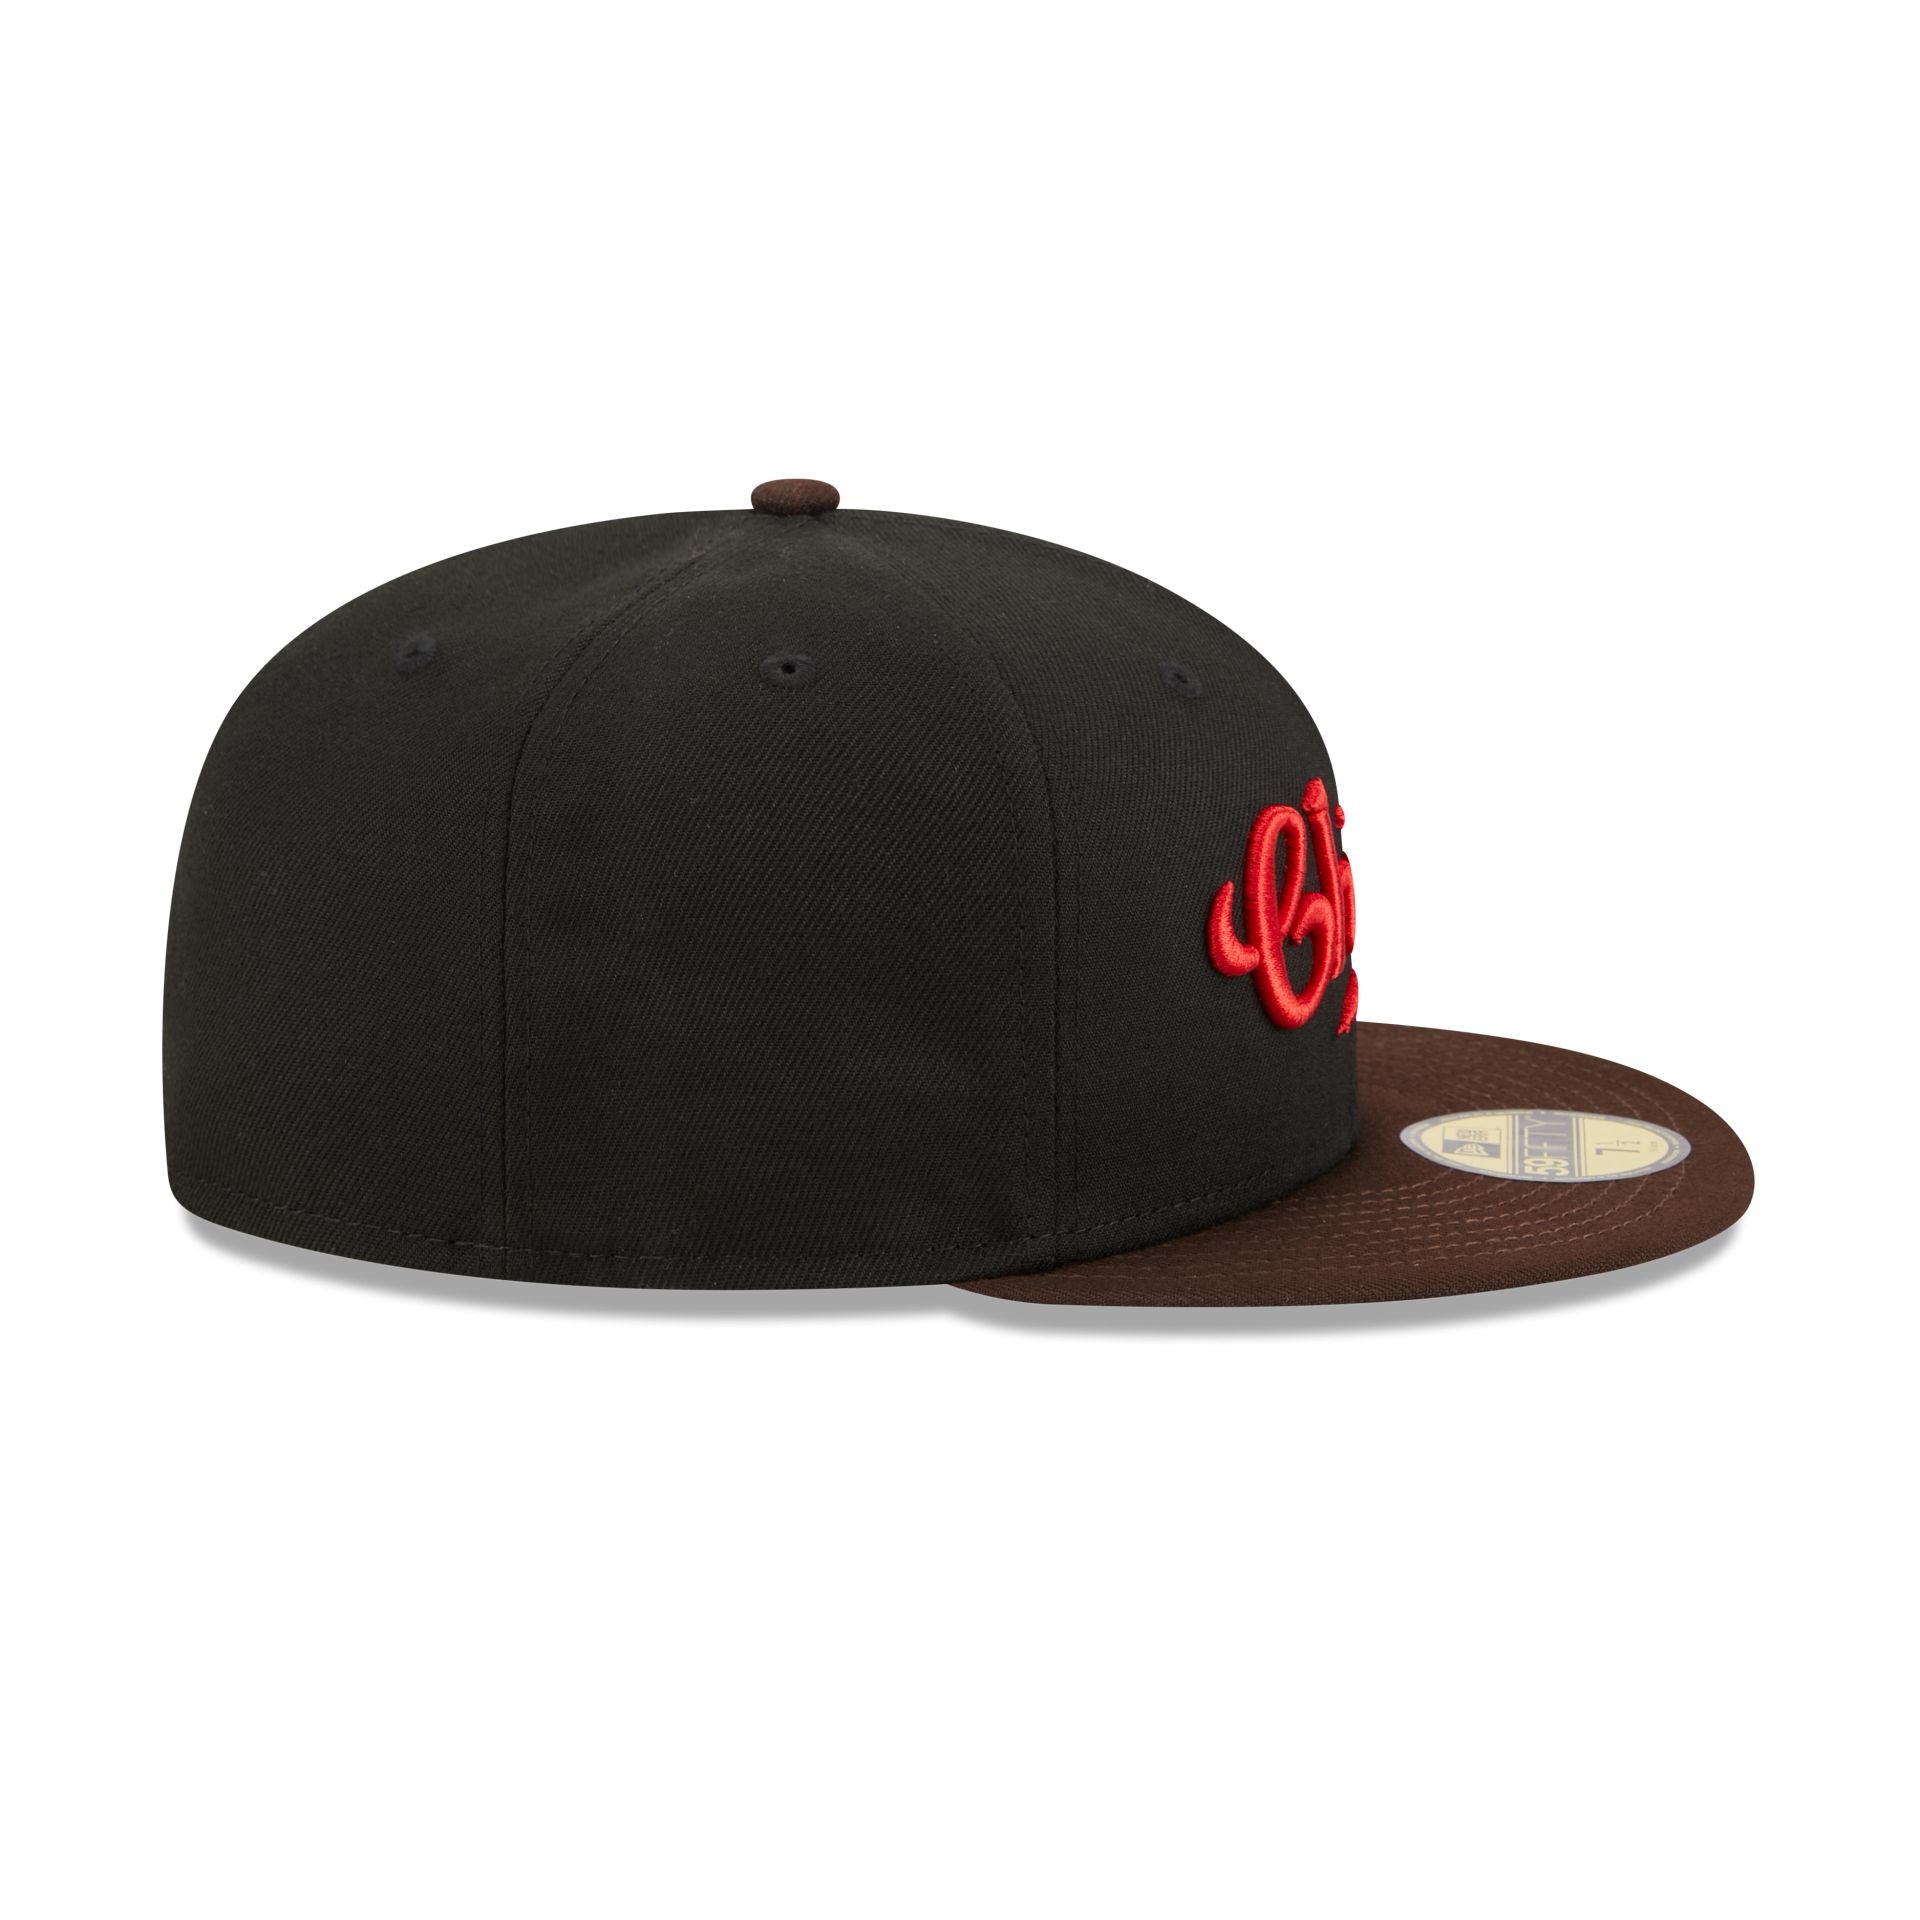 New Era Cap Black 59FIFTY Fitted Hat Ornament, by New Era